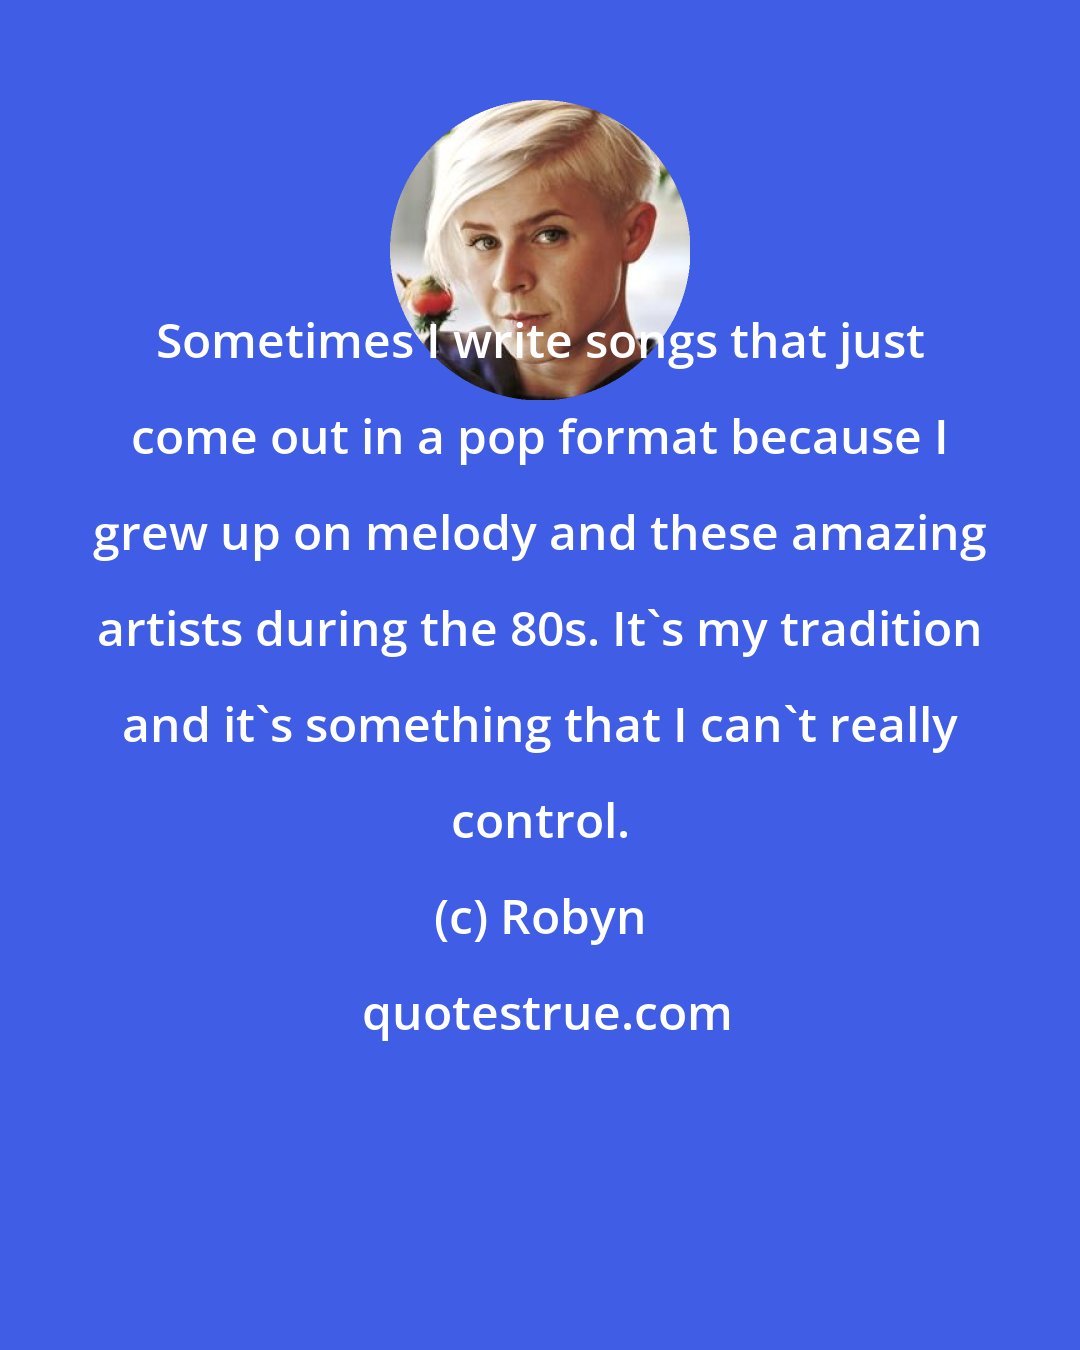 Robyn: Sometimes I write songs that just come out in a pop format because I grew up on melody and these amazing artists during the 80s. It's my tradition and it's something that I can't really control.